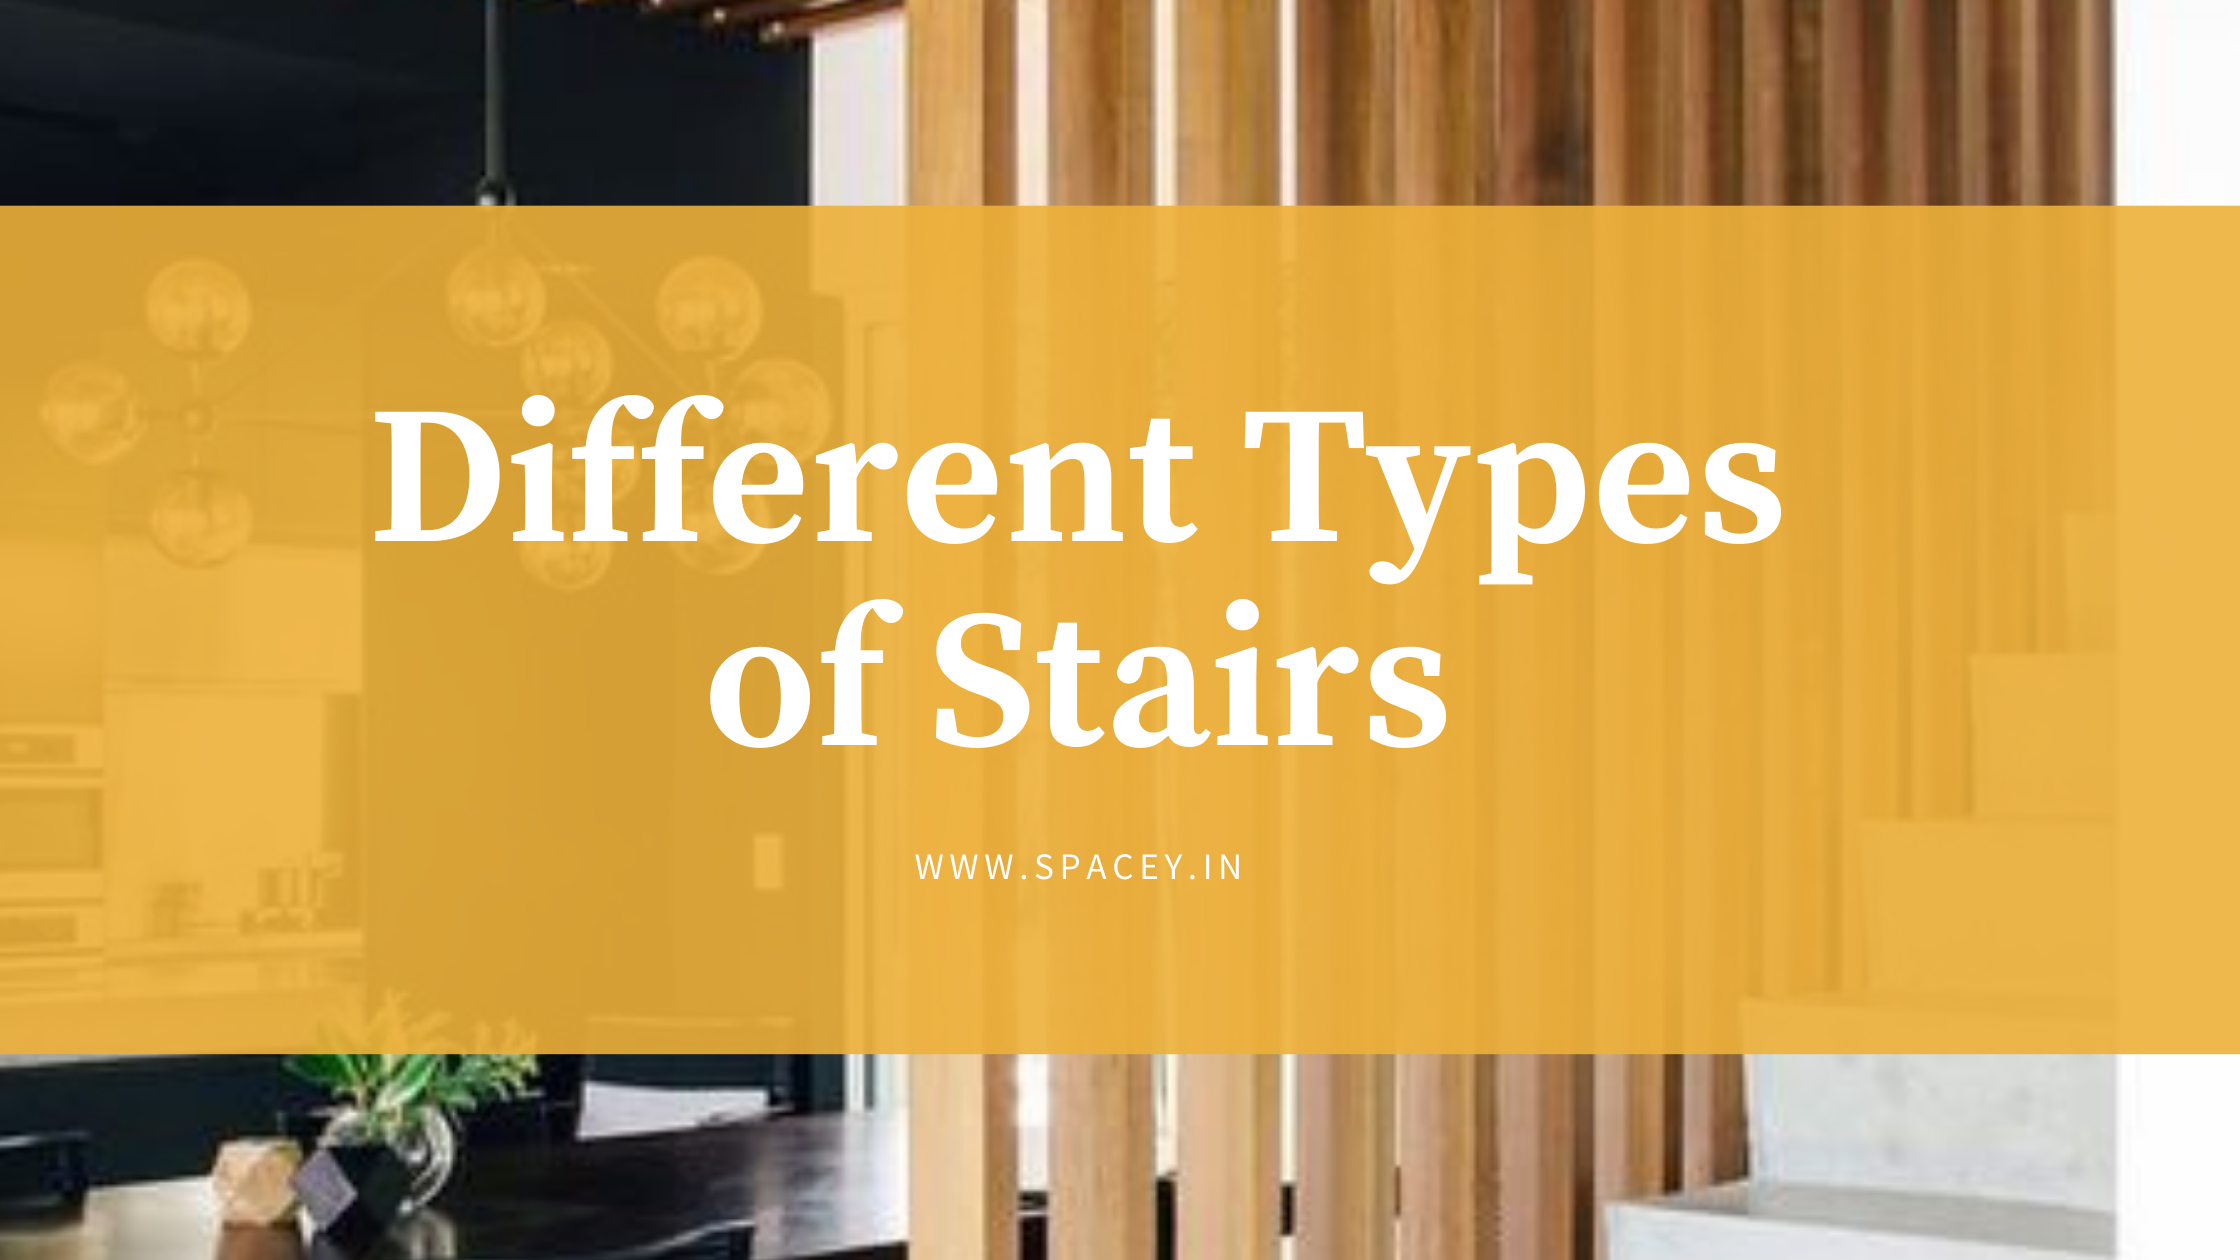 10 Different Types of Staircase Design